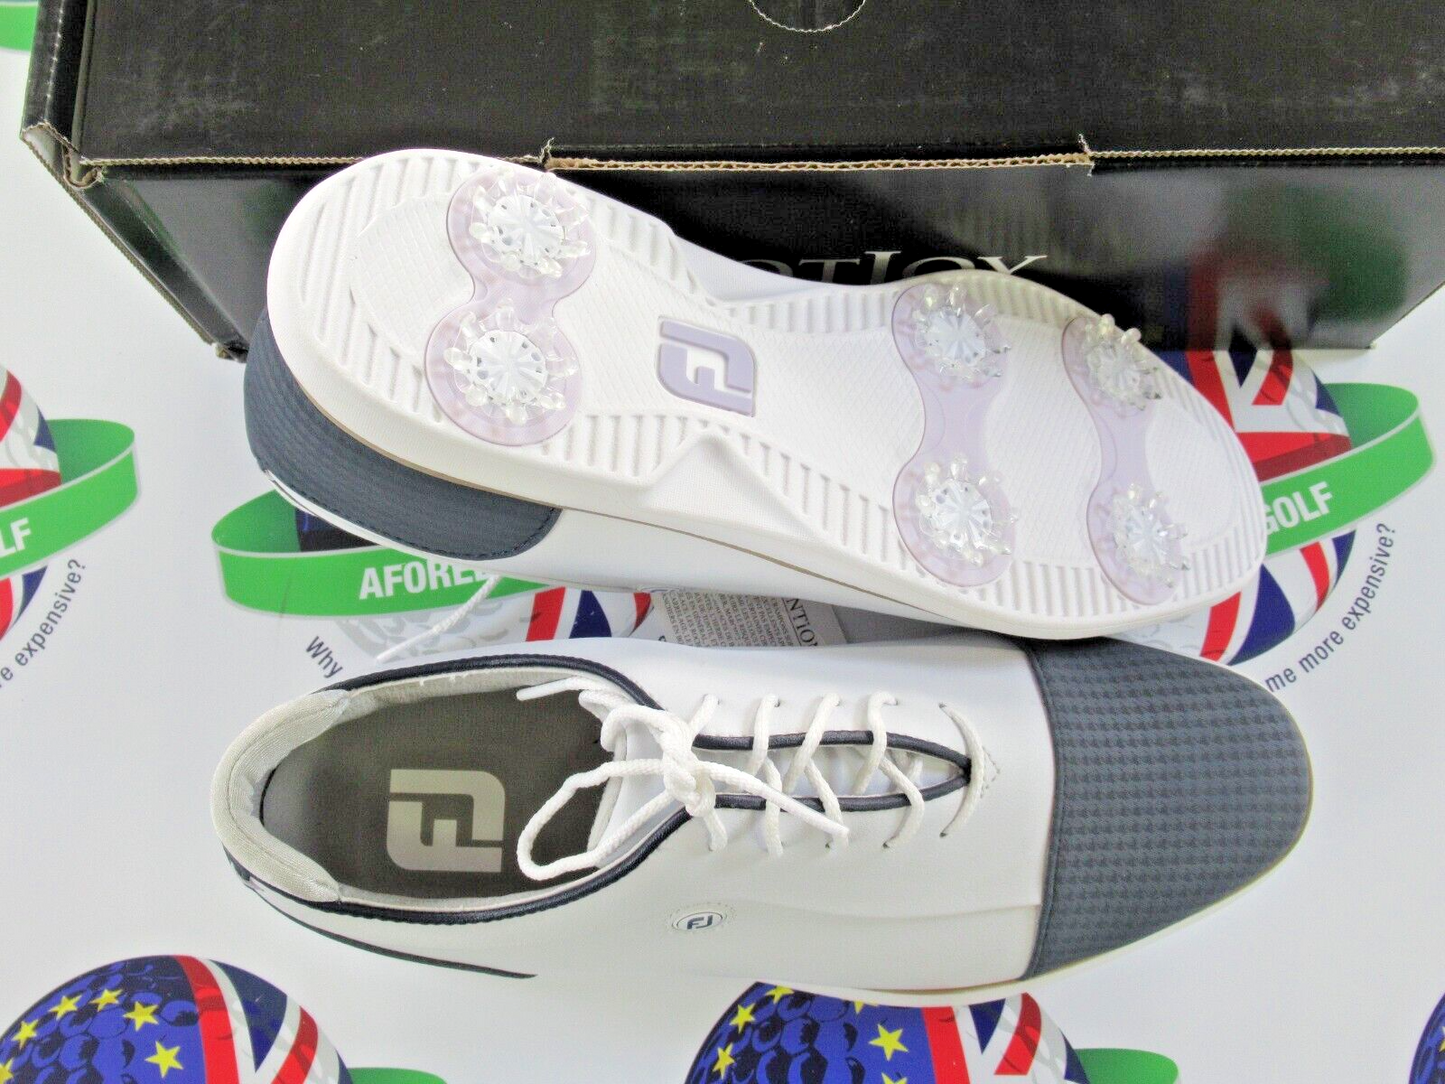 footjoy fj traditions womens golf shoes 97915k white/navy size 4.5 wide/large